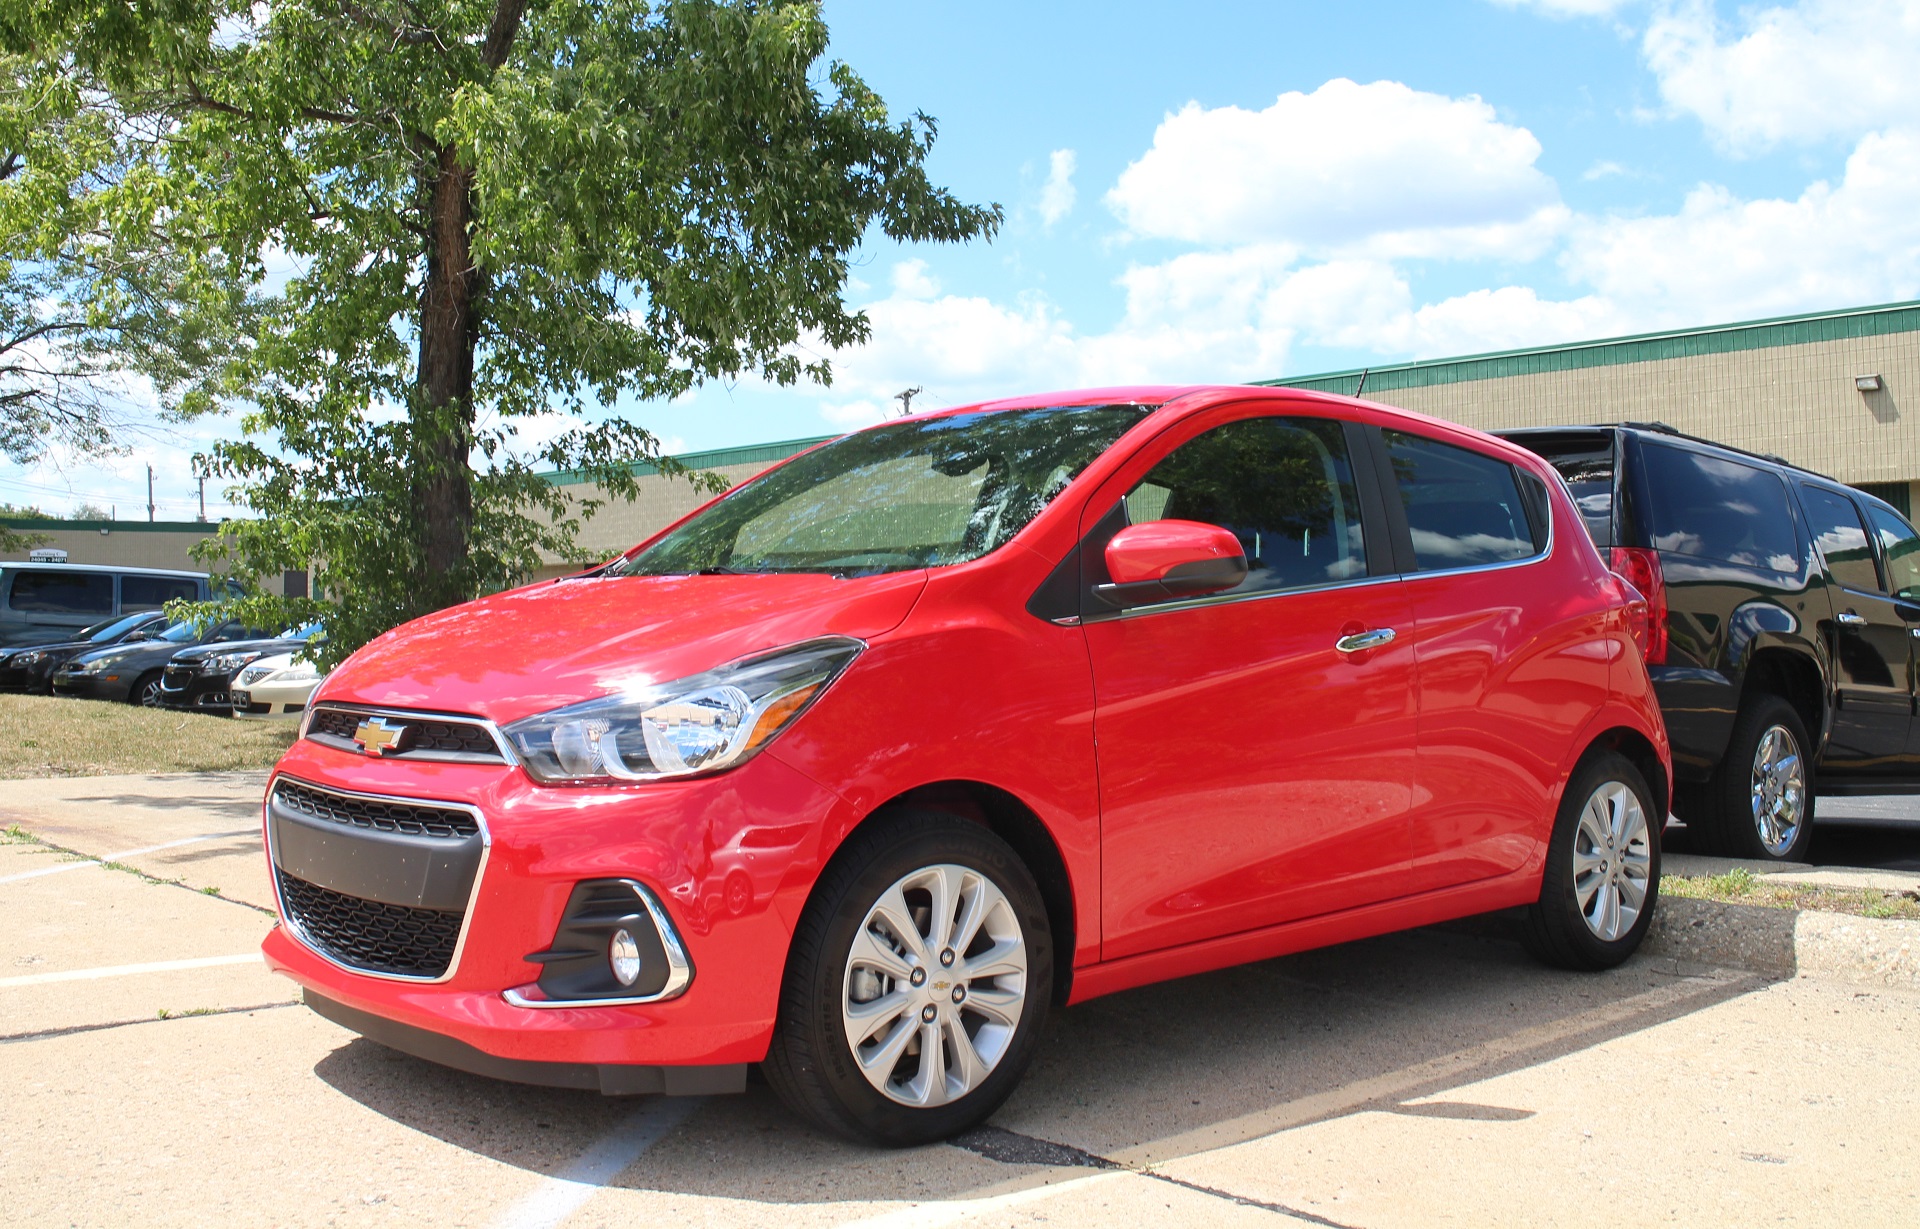 2016 Chevrolet Spark (Chevy) Review, Ratings, Specs, Prices, and Photos -  The Car Connection